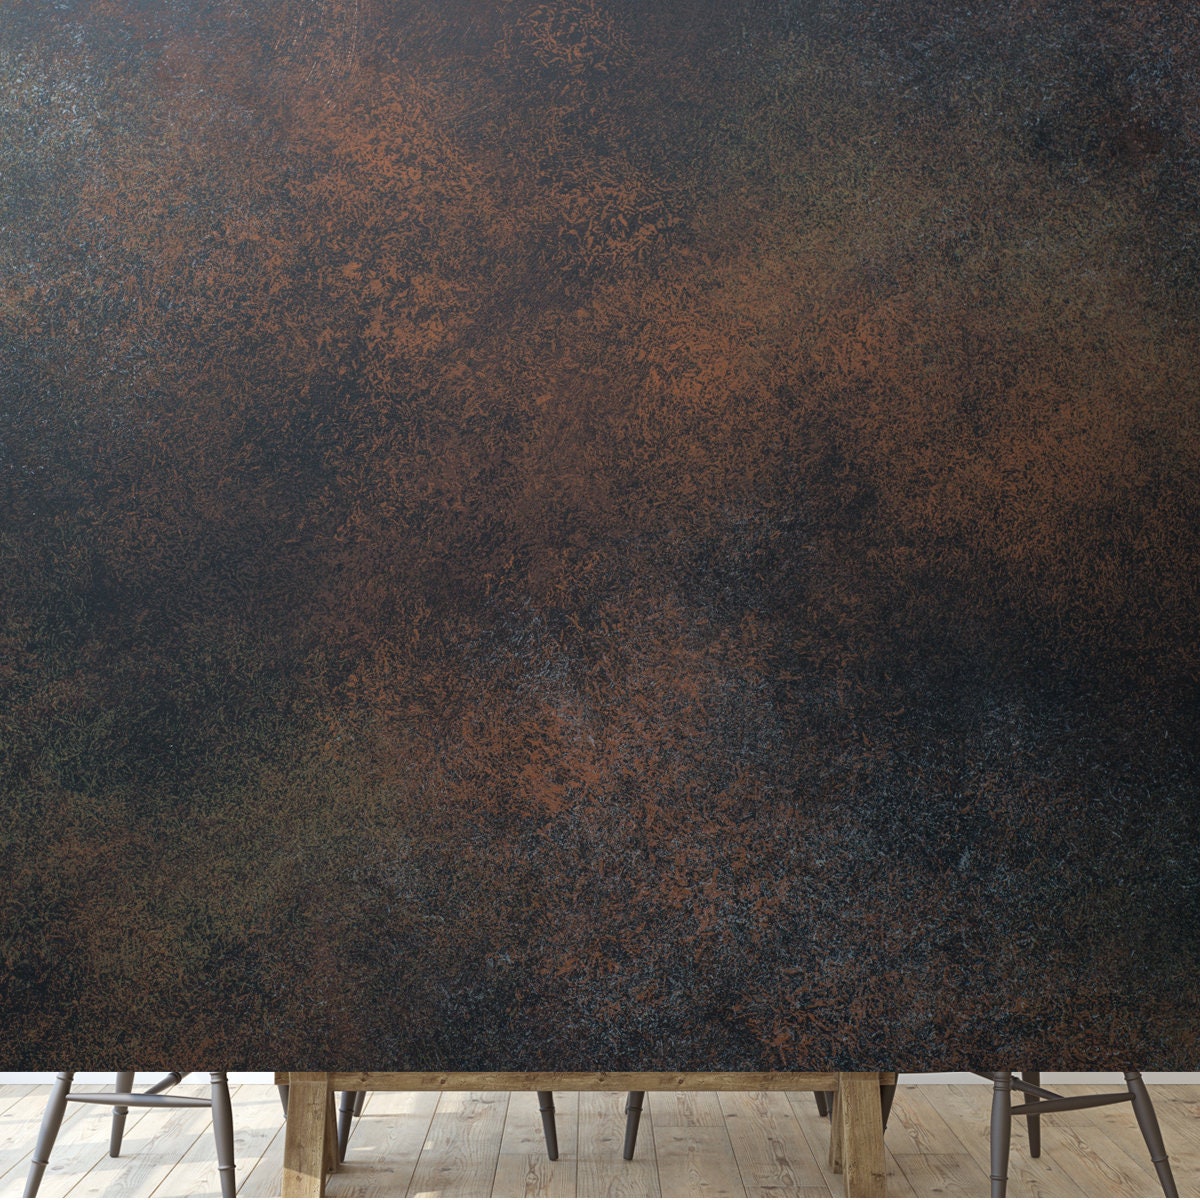 Empty Brown Rusty Stone or Metal Surface Texture Wallpaper Dining Room Mural